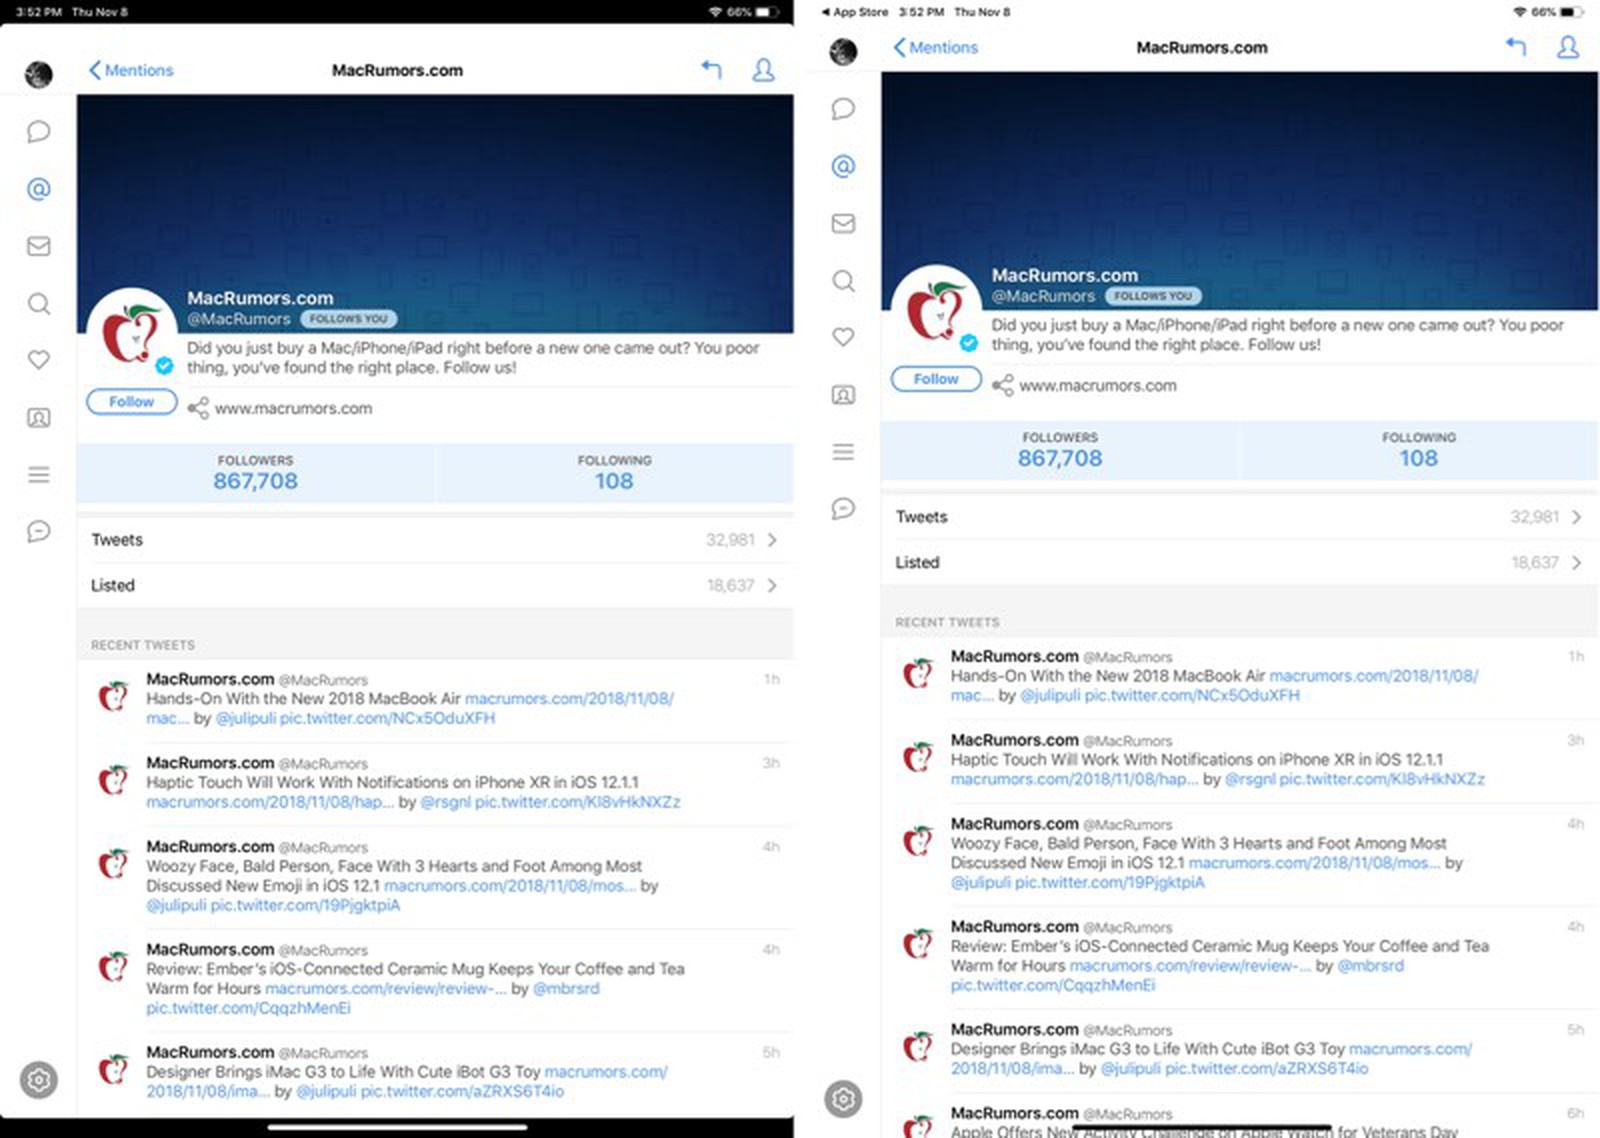 tweetbot 3 ends support